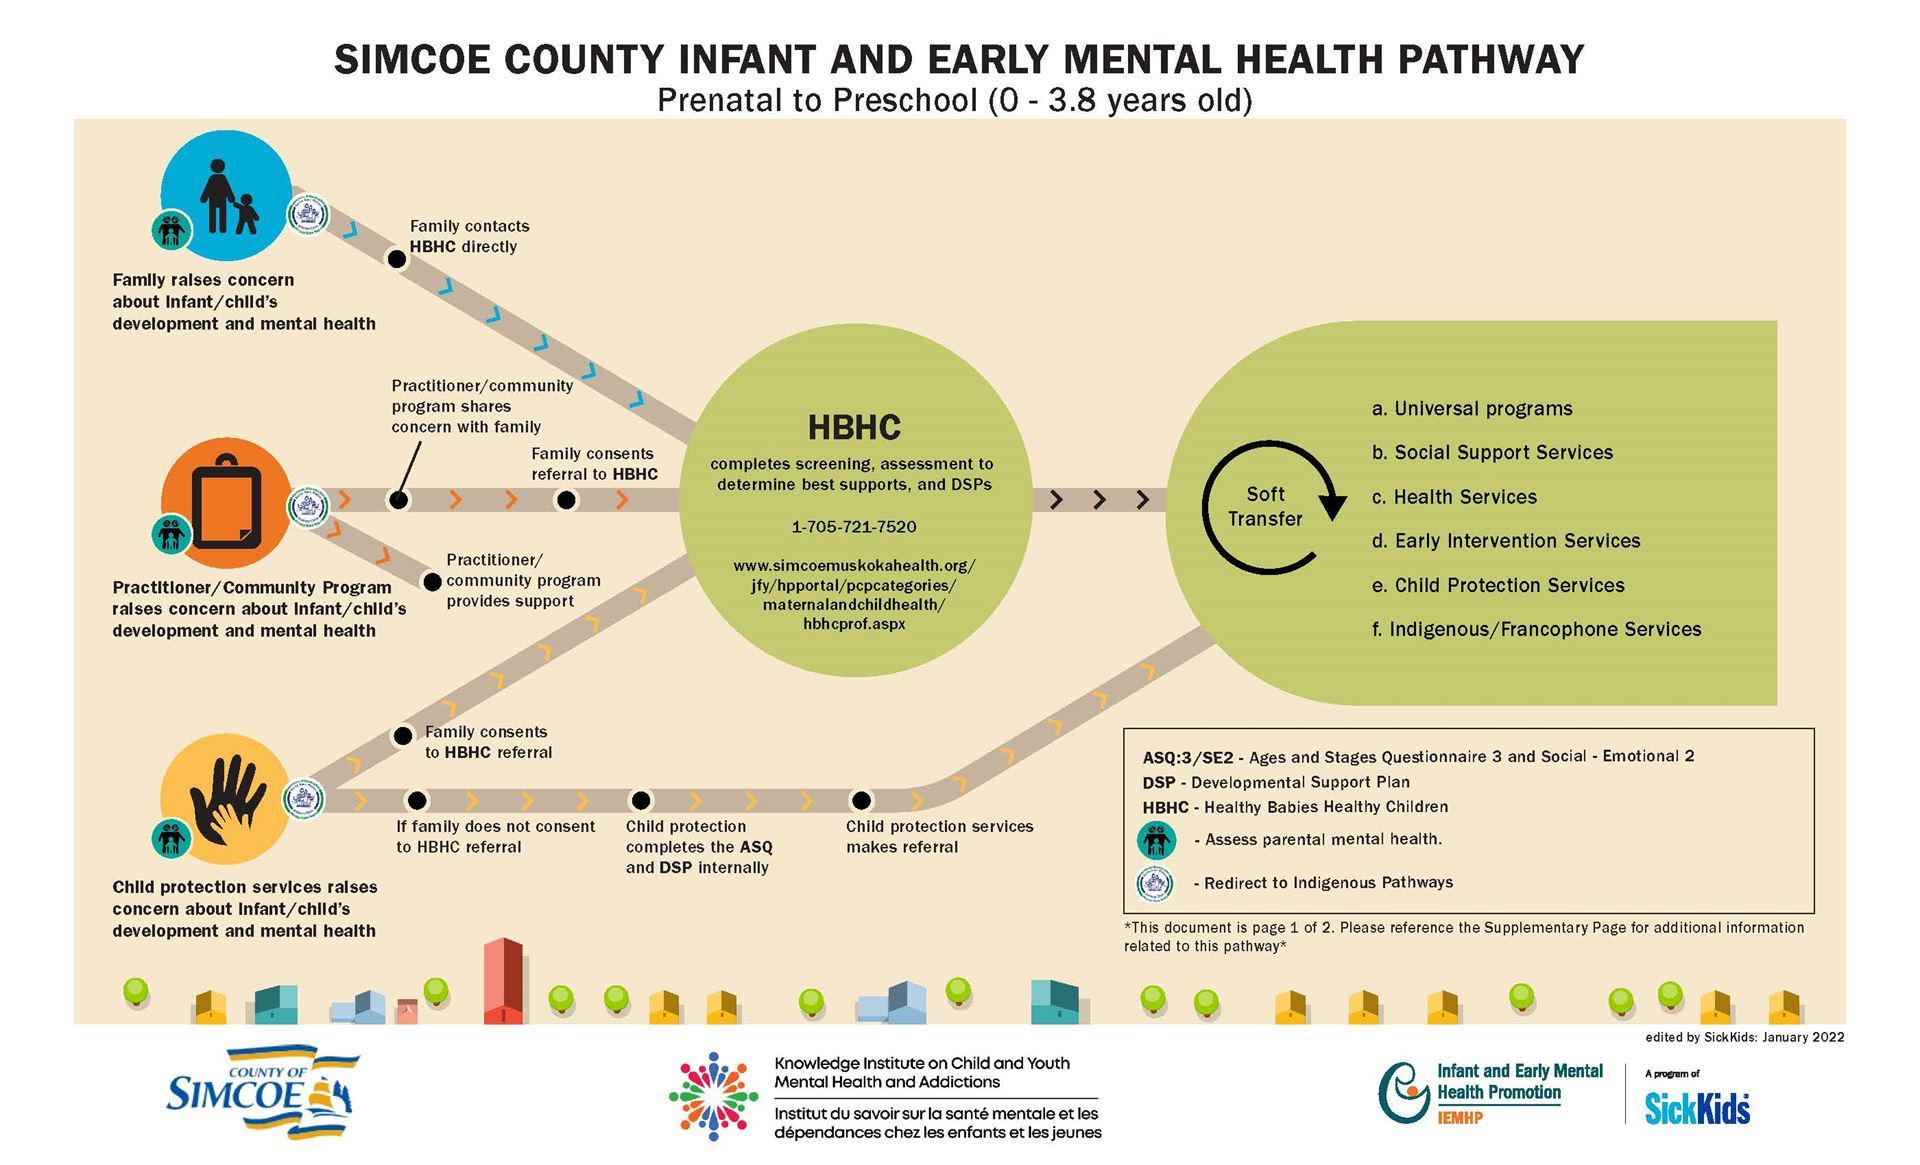 An Example of a Care Pathway developed with the Simcoe County 